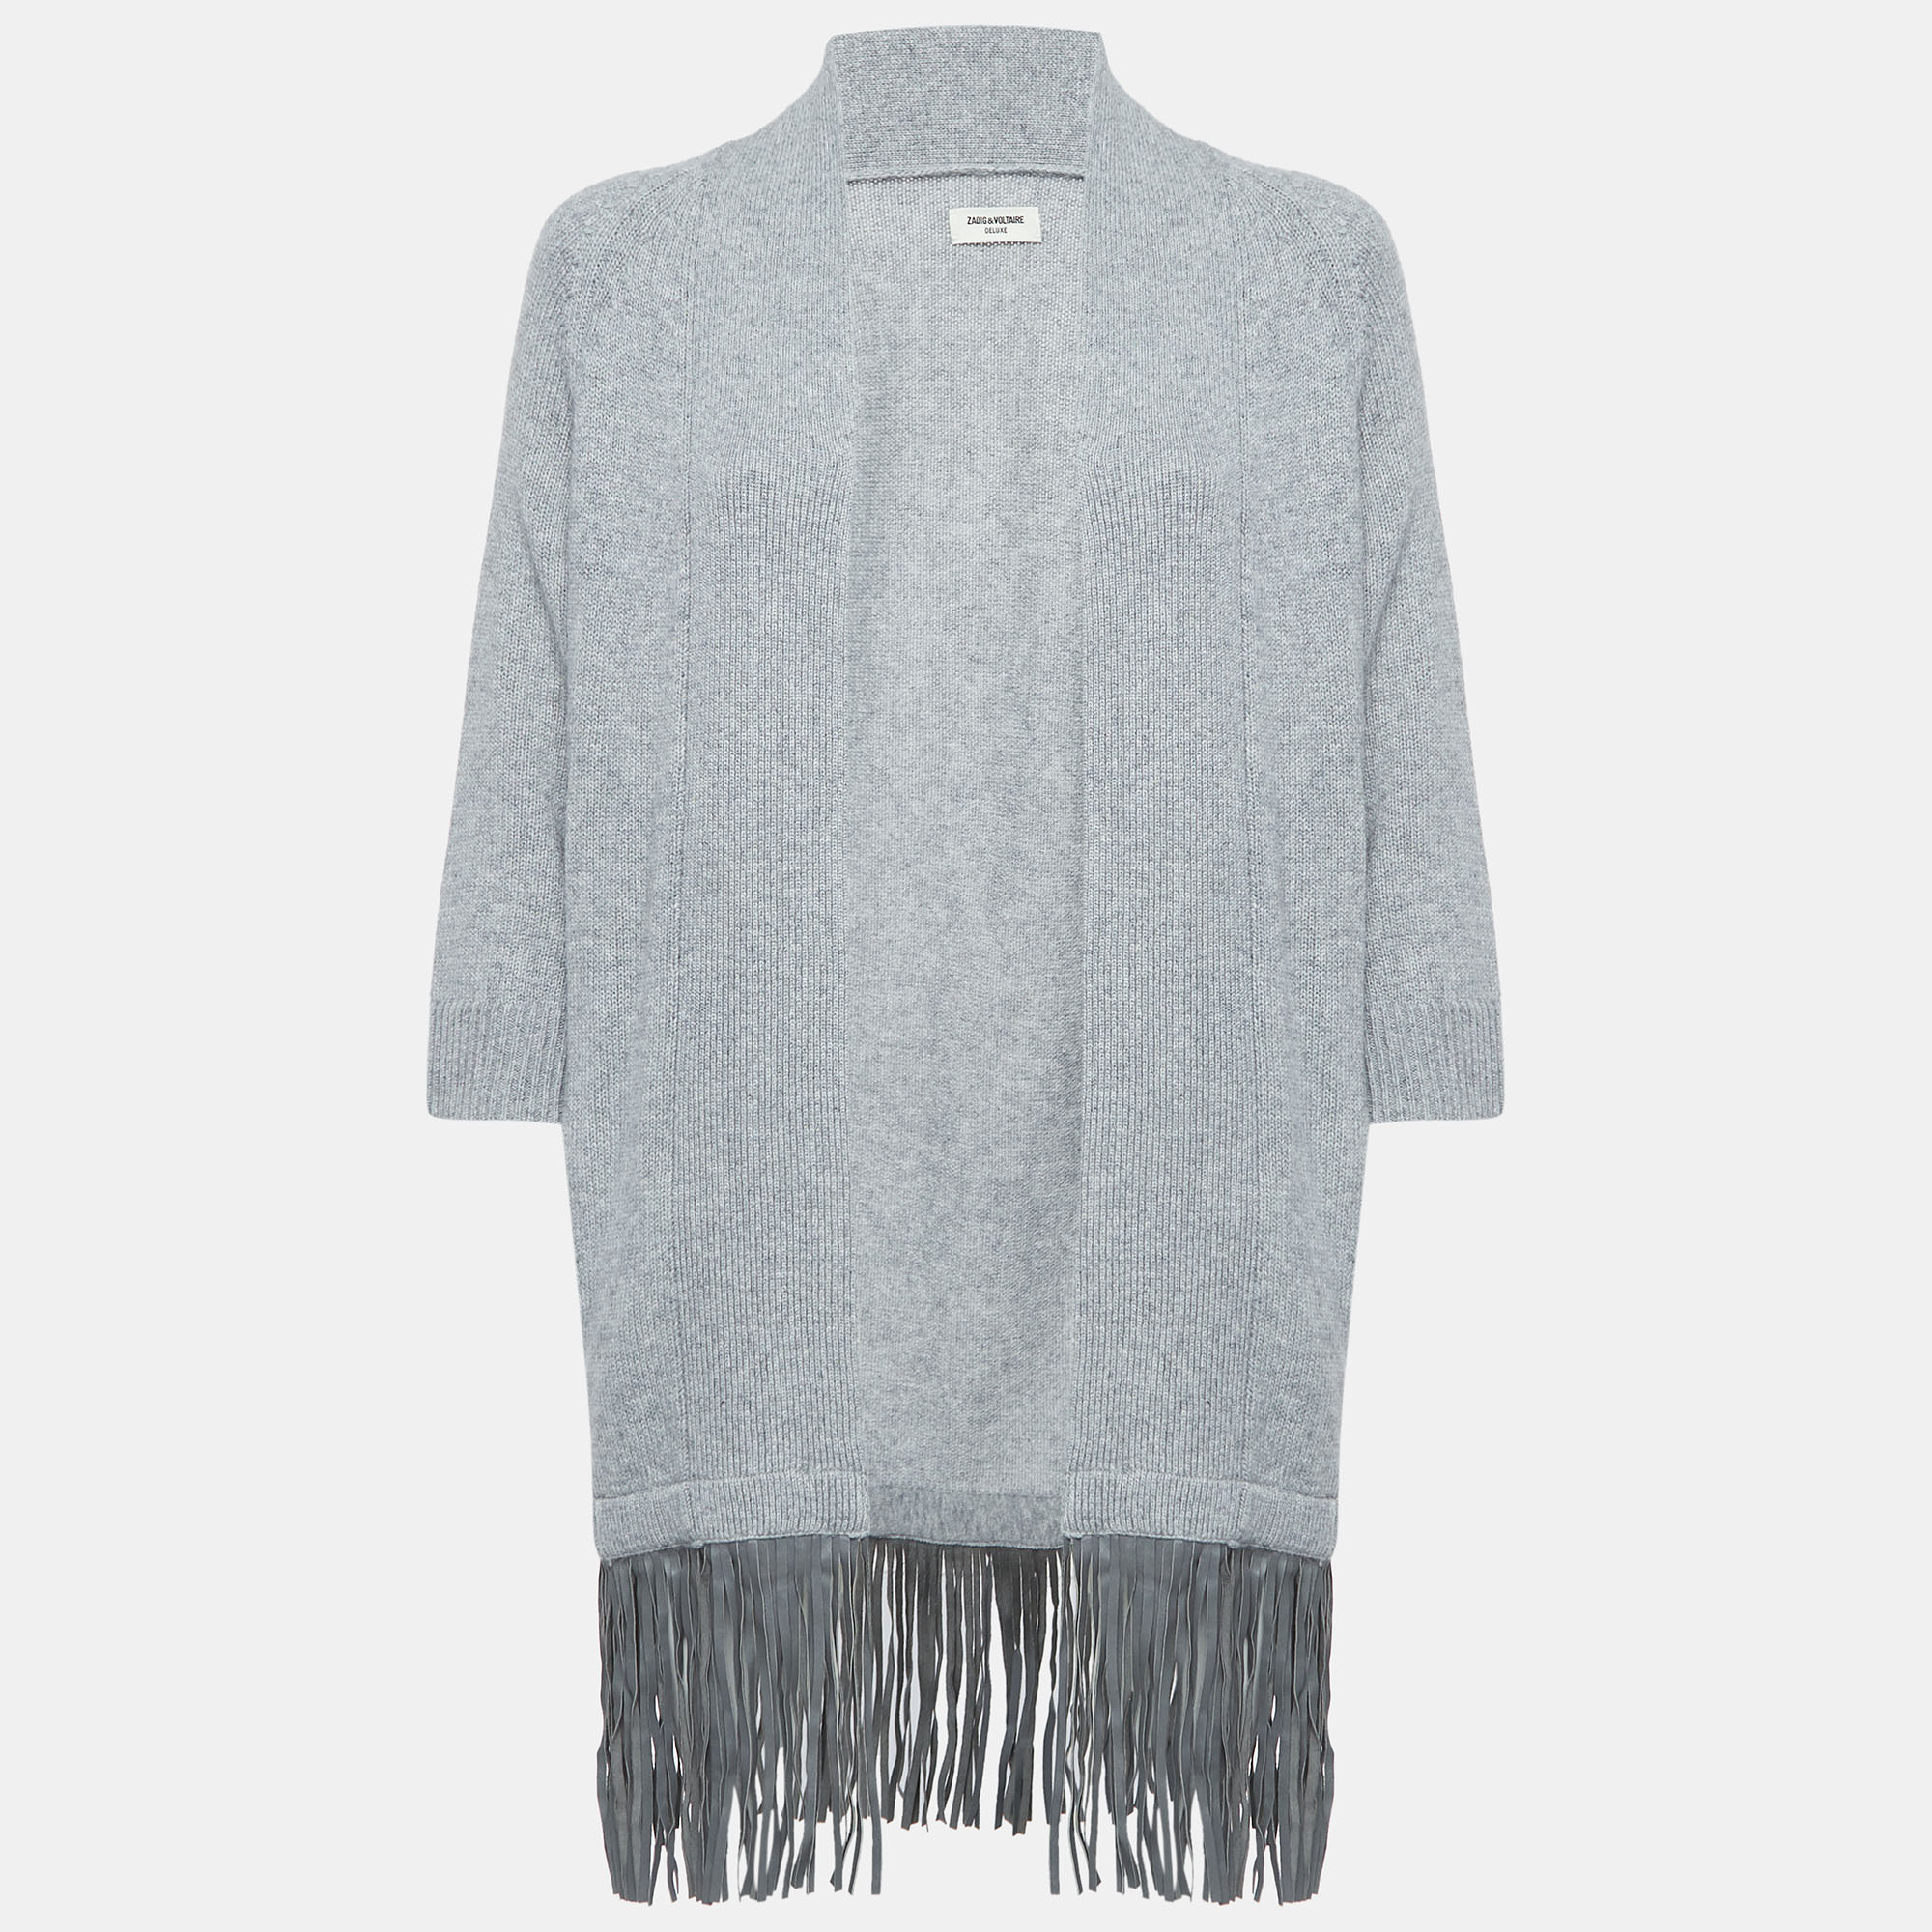 

Zadig & Voltaire Grey Cashmere Knit Open Front Fringed Cardigan XS/S